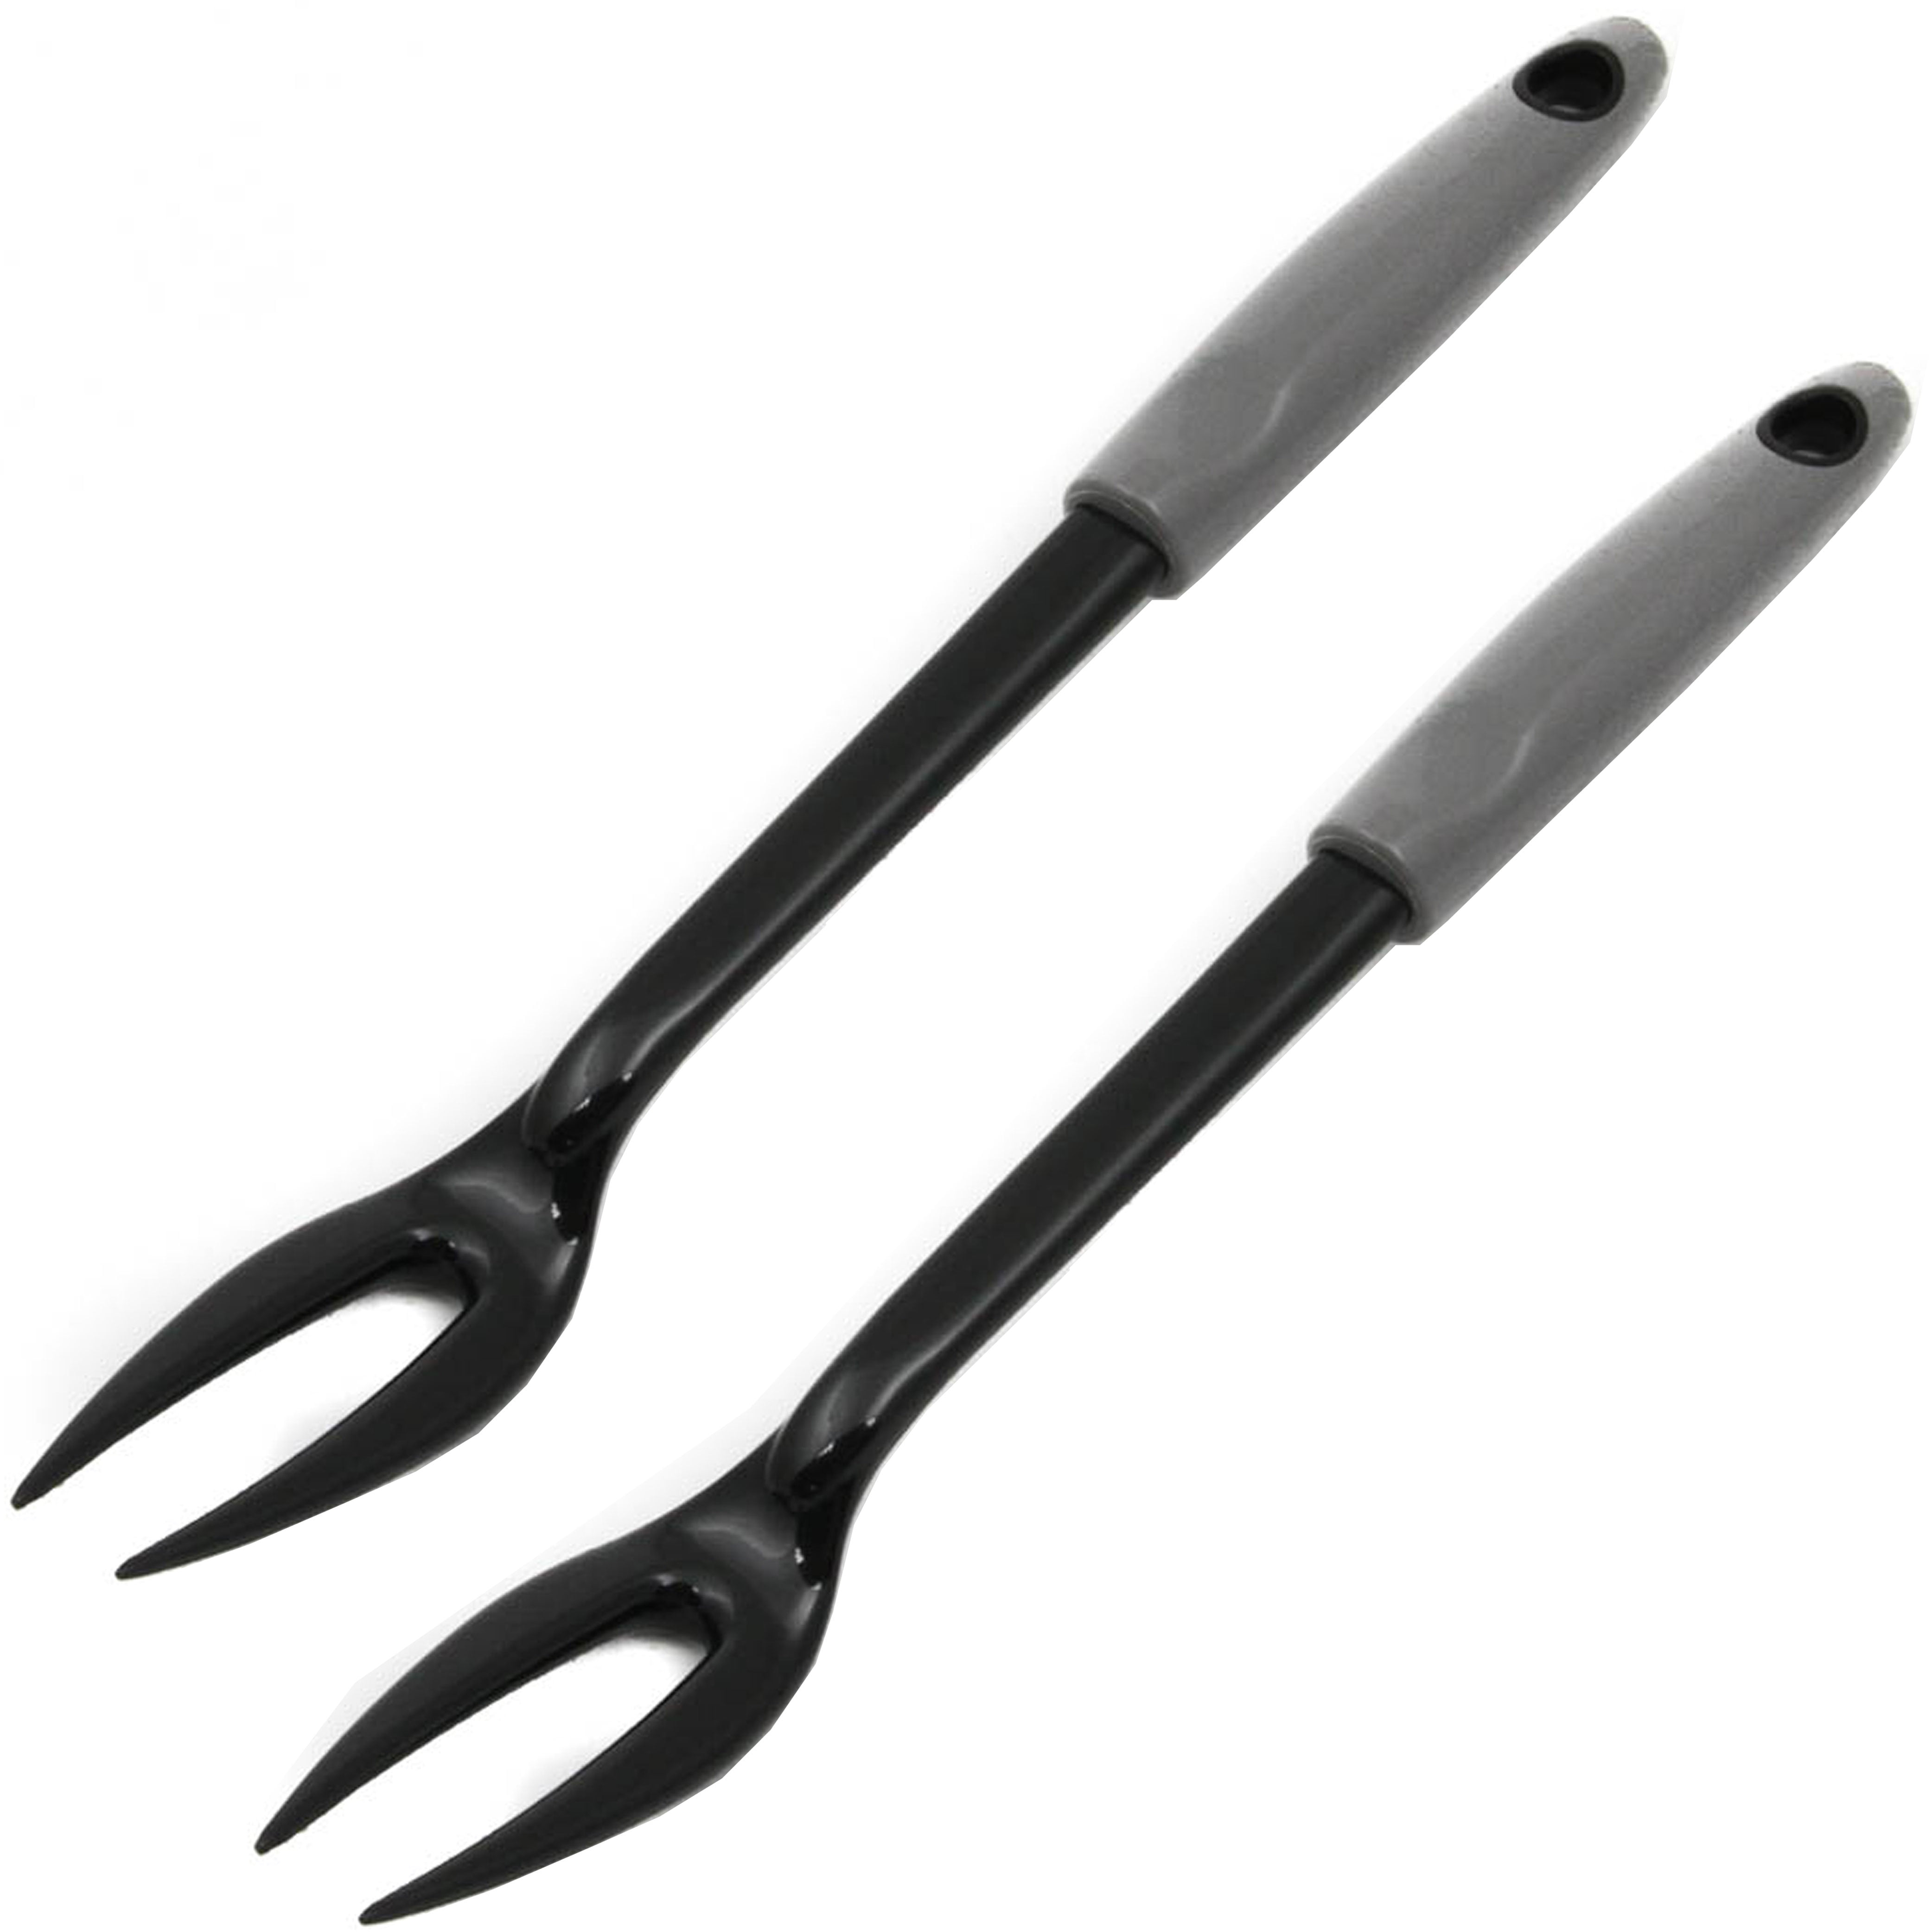 2 Stainless Steel Serving Fork Meat Cooking Utensil Kitchen Tools Flatware,  1 - Fry's Food Stores